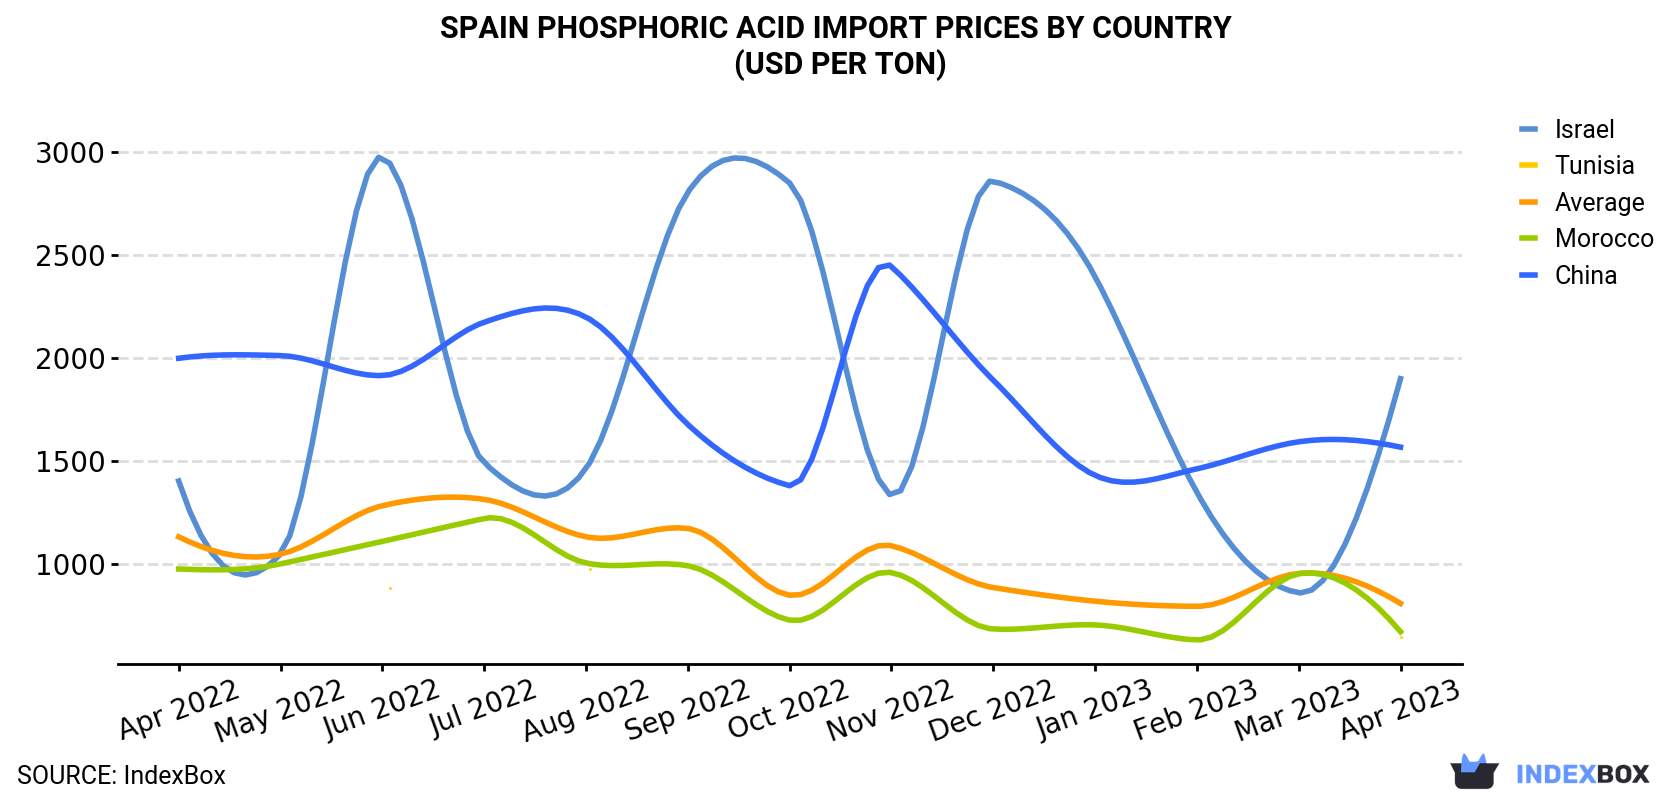 Spain Phosphoric Acid Import Prices By Country (USD Per Ton)